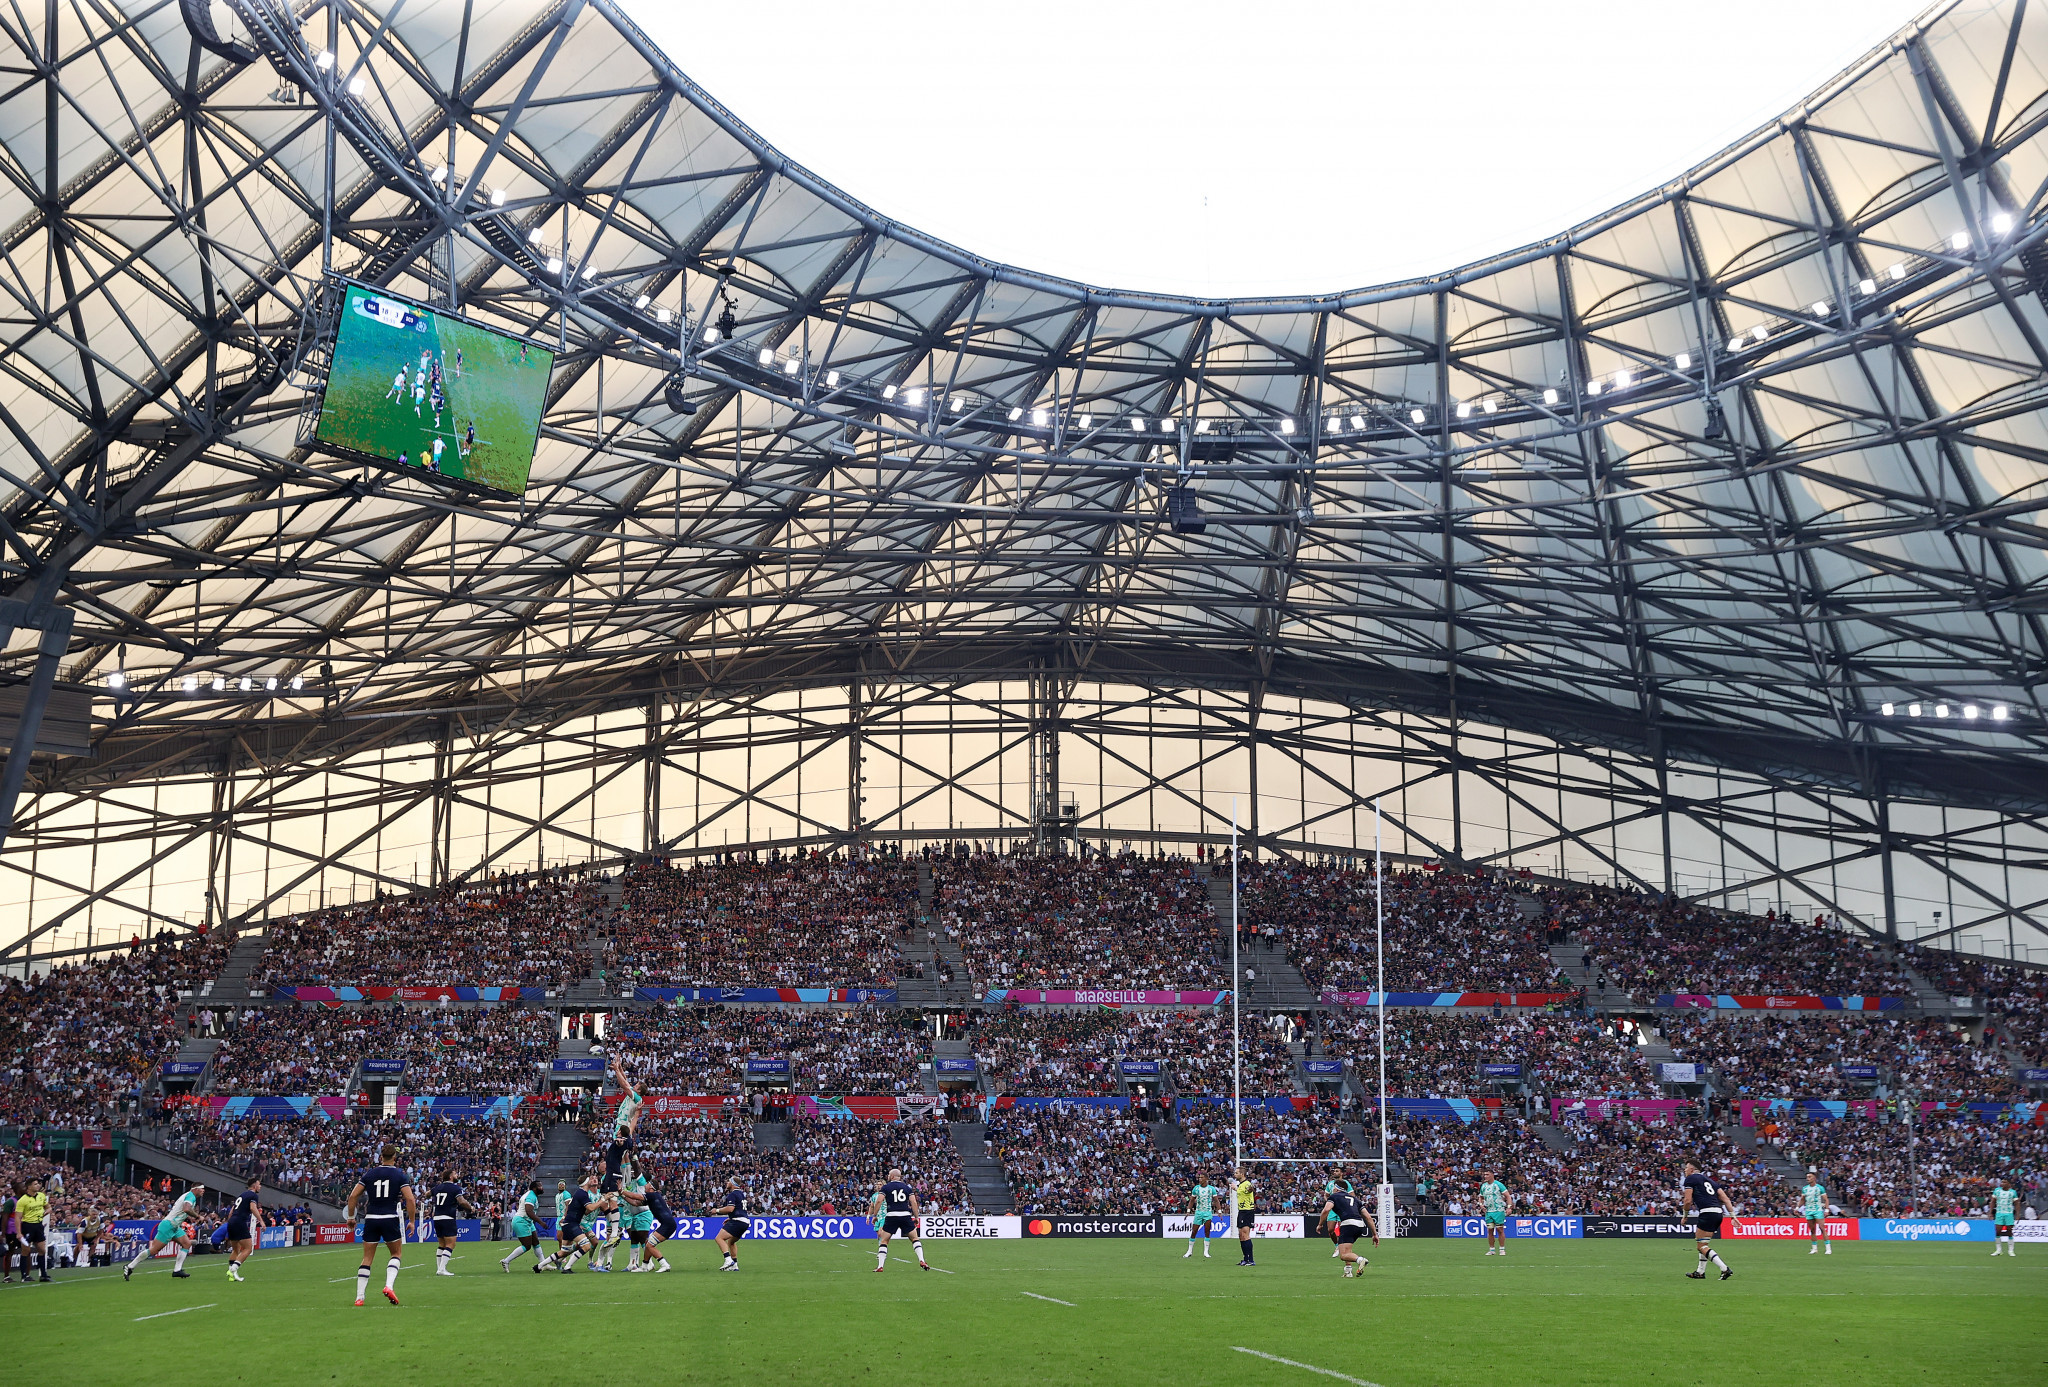 Stade Vélodrome in Marseille was the venue for the match between South Africa and Scotland ©Getty Images